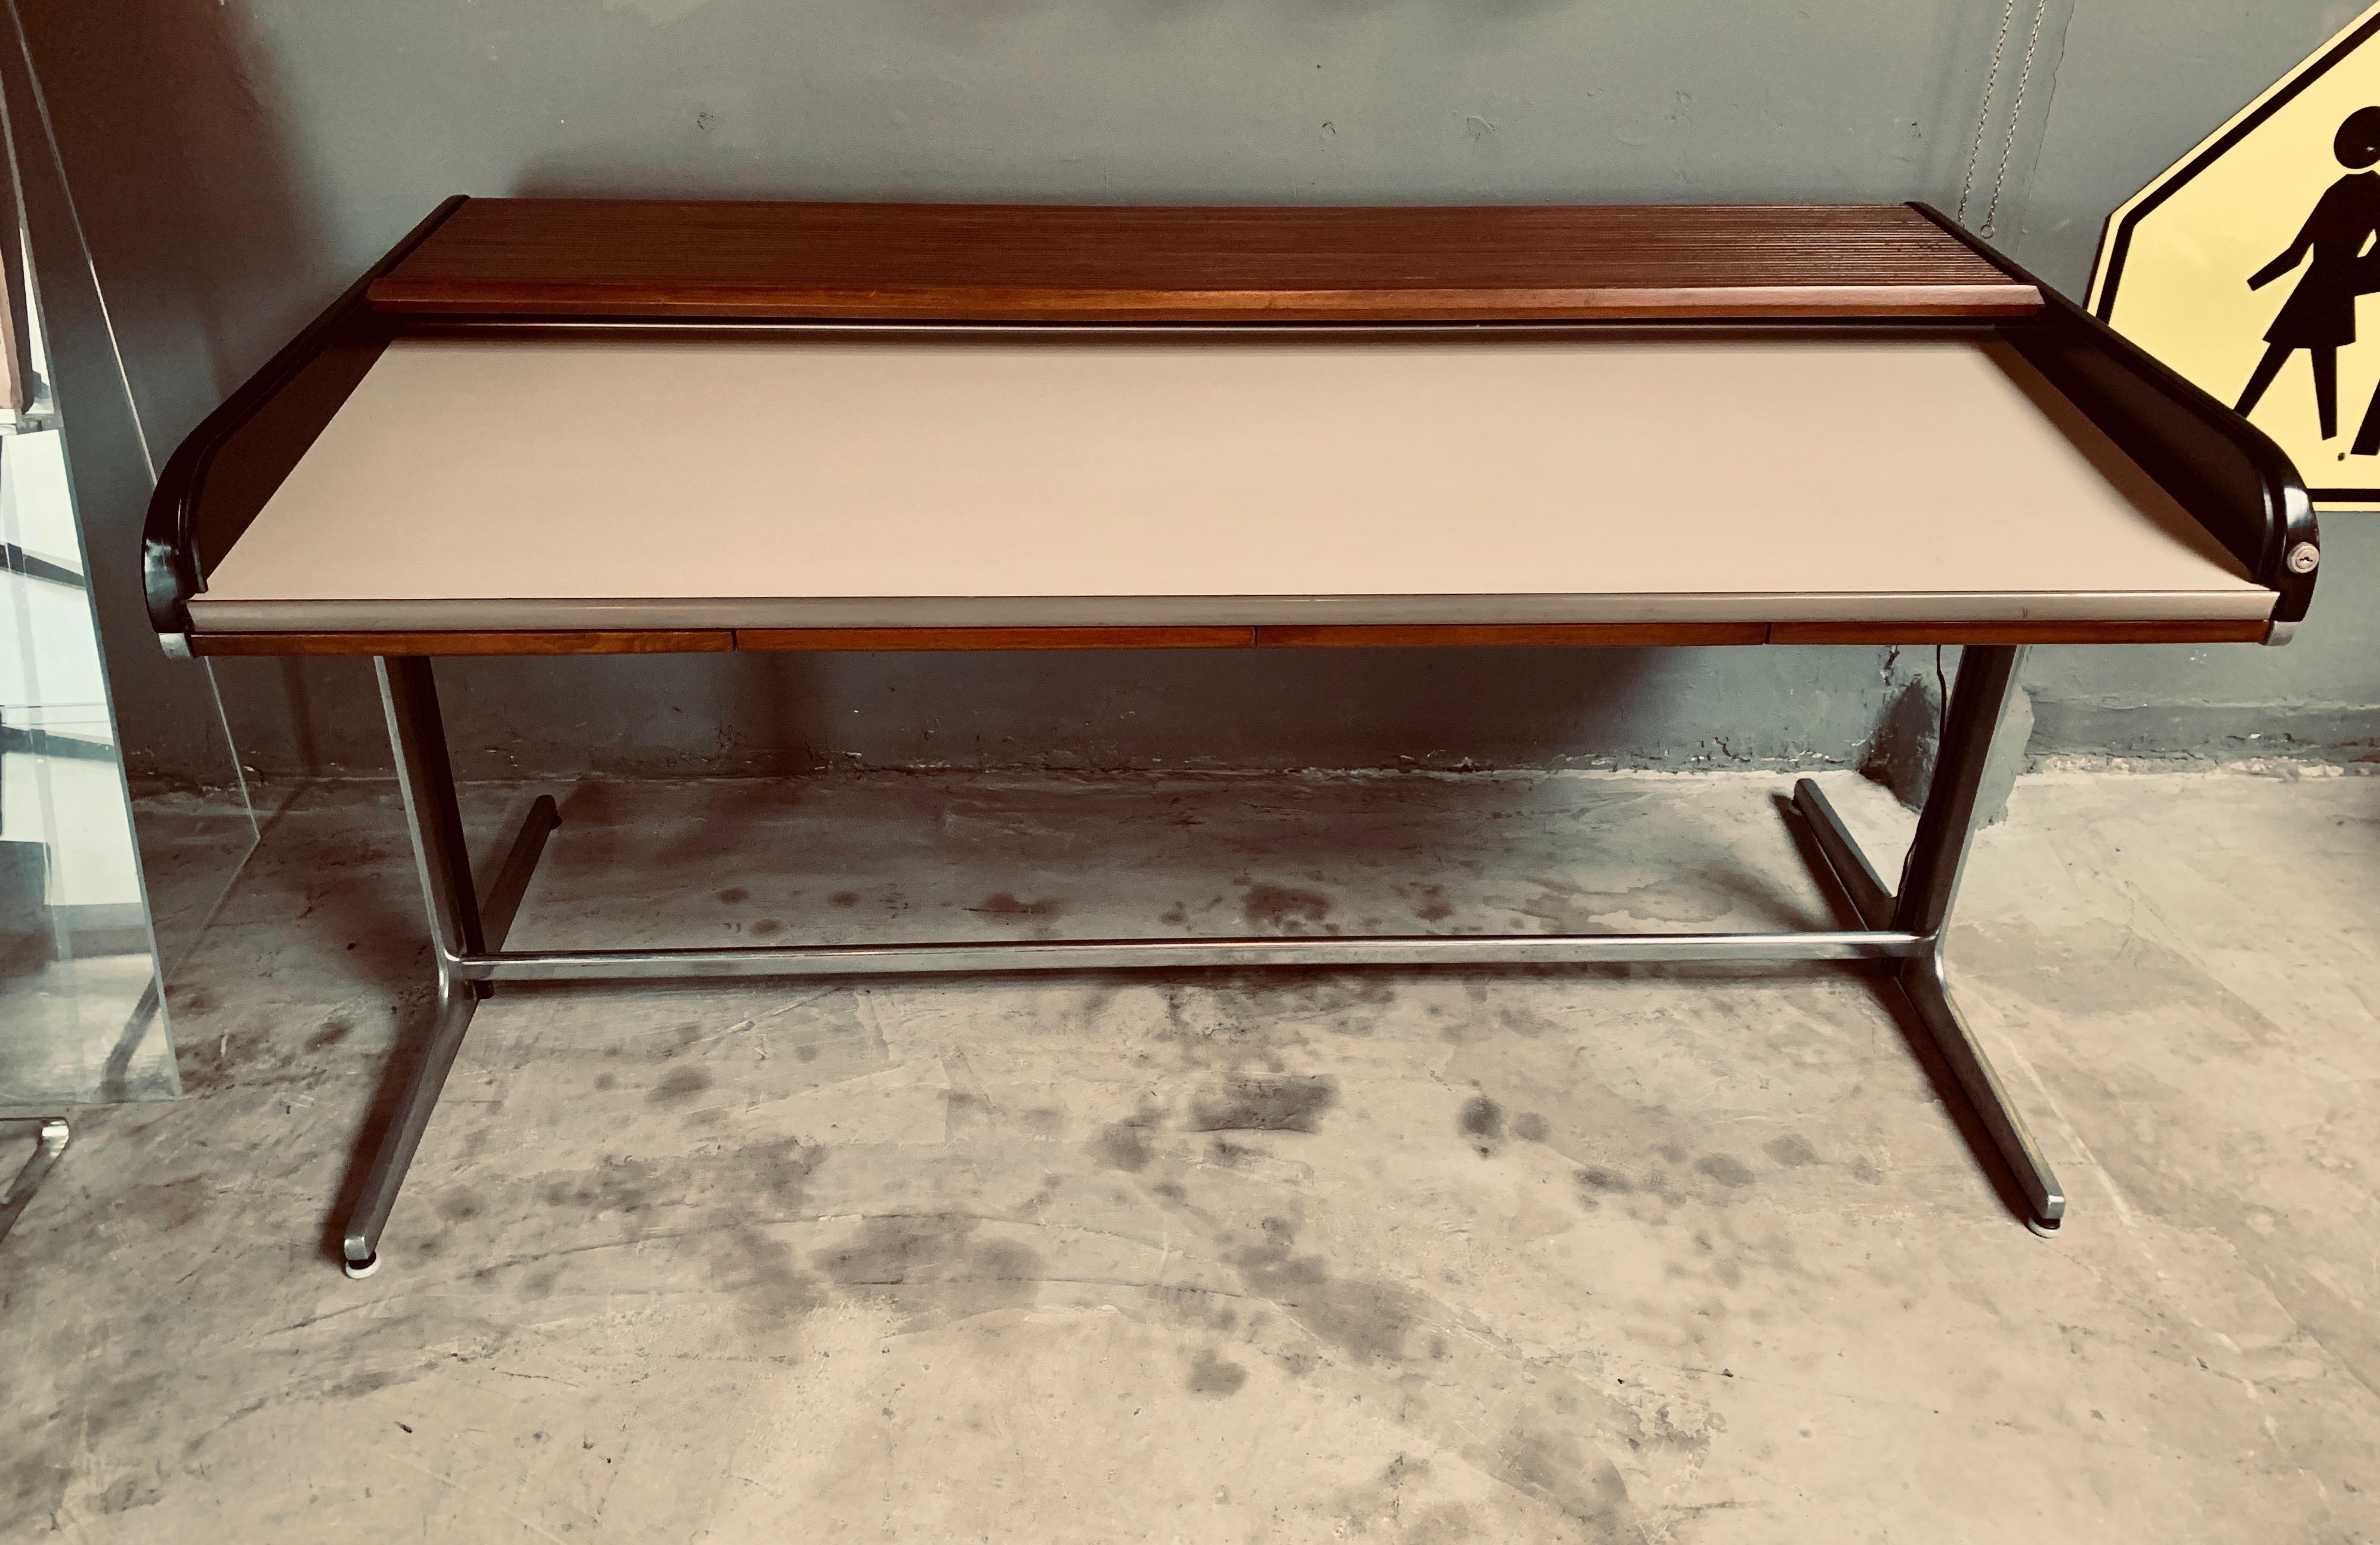 Fantastic desk by George Nelson for Herman Miller. Lockable roll top desk with 4 pullout / pull-out drawers super functional and looks great closed, sitting in the room. Tons of file space hidden in the back compartment. Internal power source can be